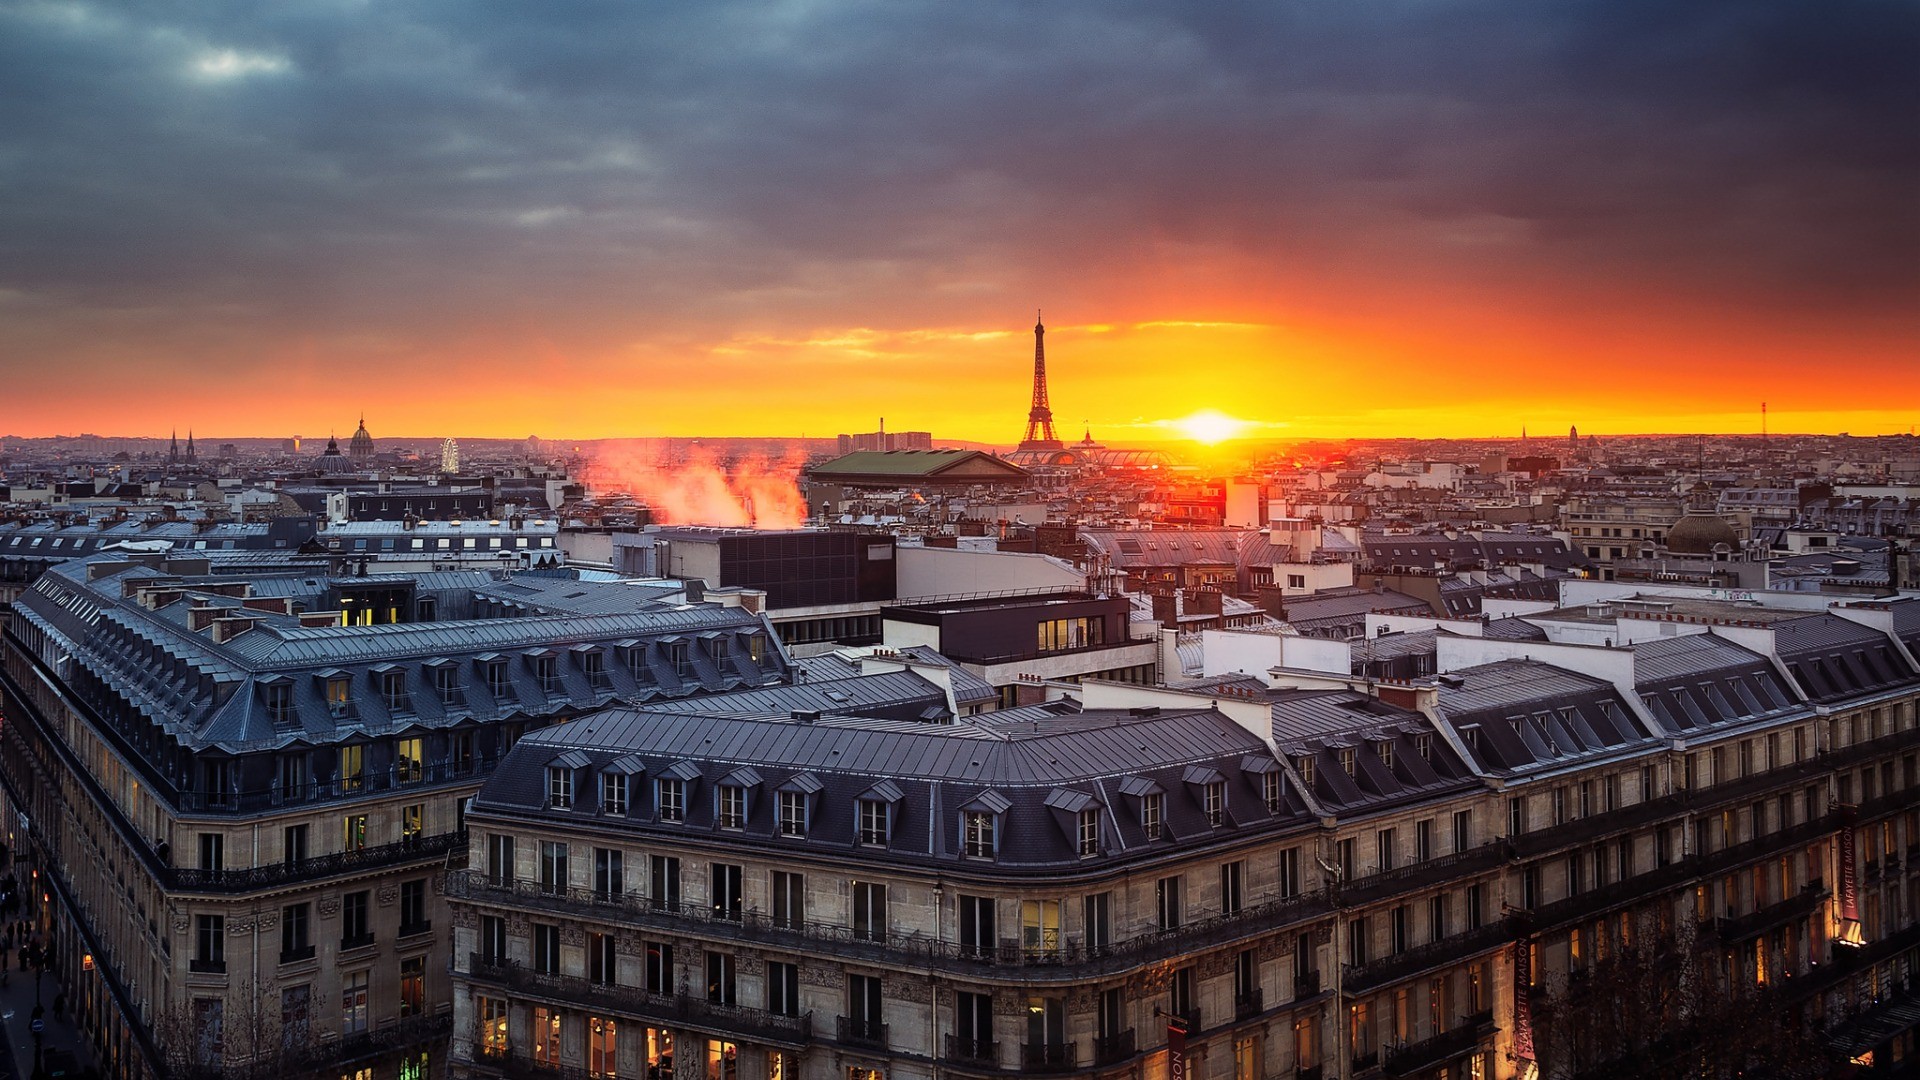 architecture, Old building, City, Capital, Europe, Sky, Clouds, Paris, France, Eiffel Tower, Rooftops, Church, Cathedral, Lights, Smoke, Cityscape, Evening, Sunrise, Window Wallpaper